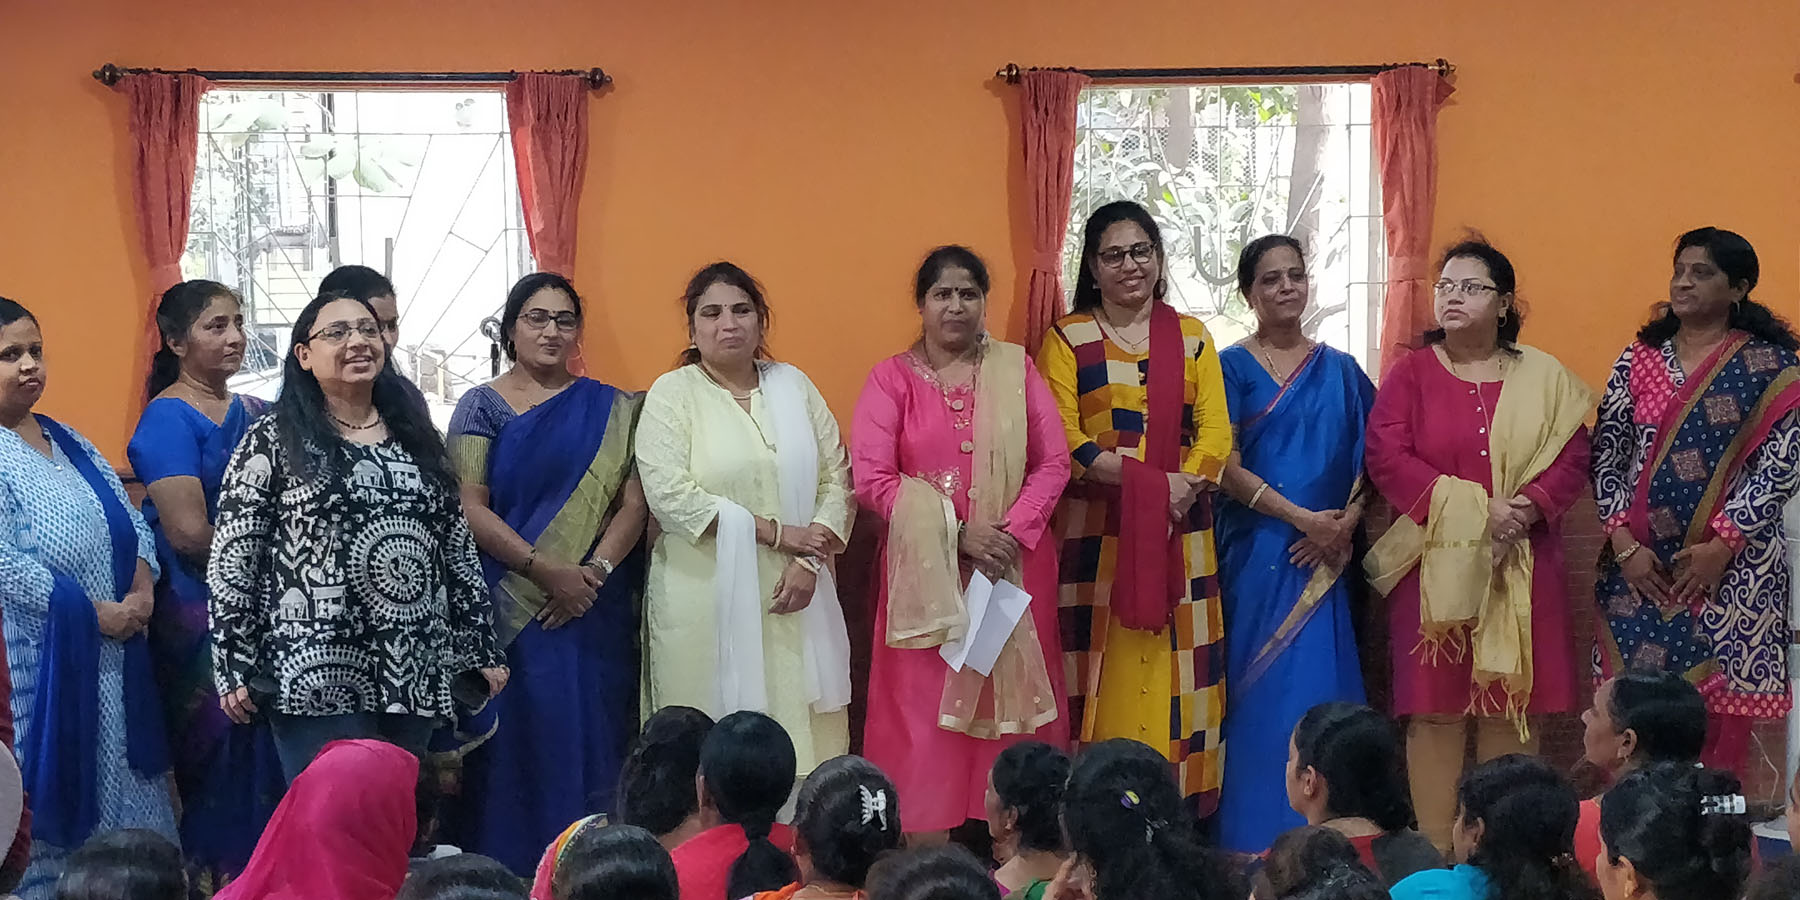 (Conversational English Teacher- Tardeo Centre) Introducing the beneficiaries that sang “I have a dream”. A lovely surprise they arranged for Ms. Minal Bajaj- who has fulfilled so many of their dreams and still continues to do so